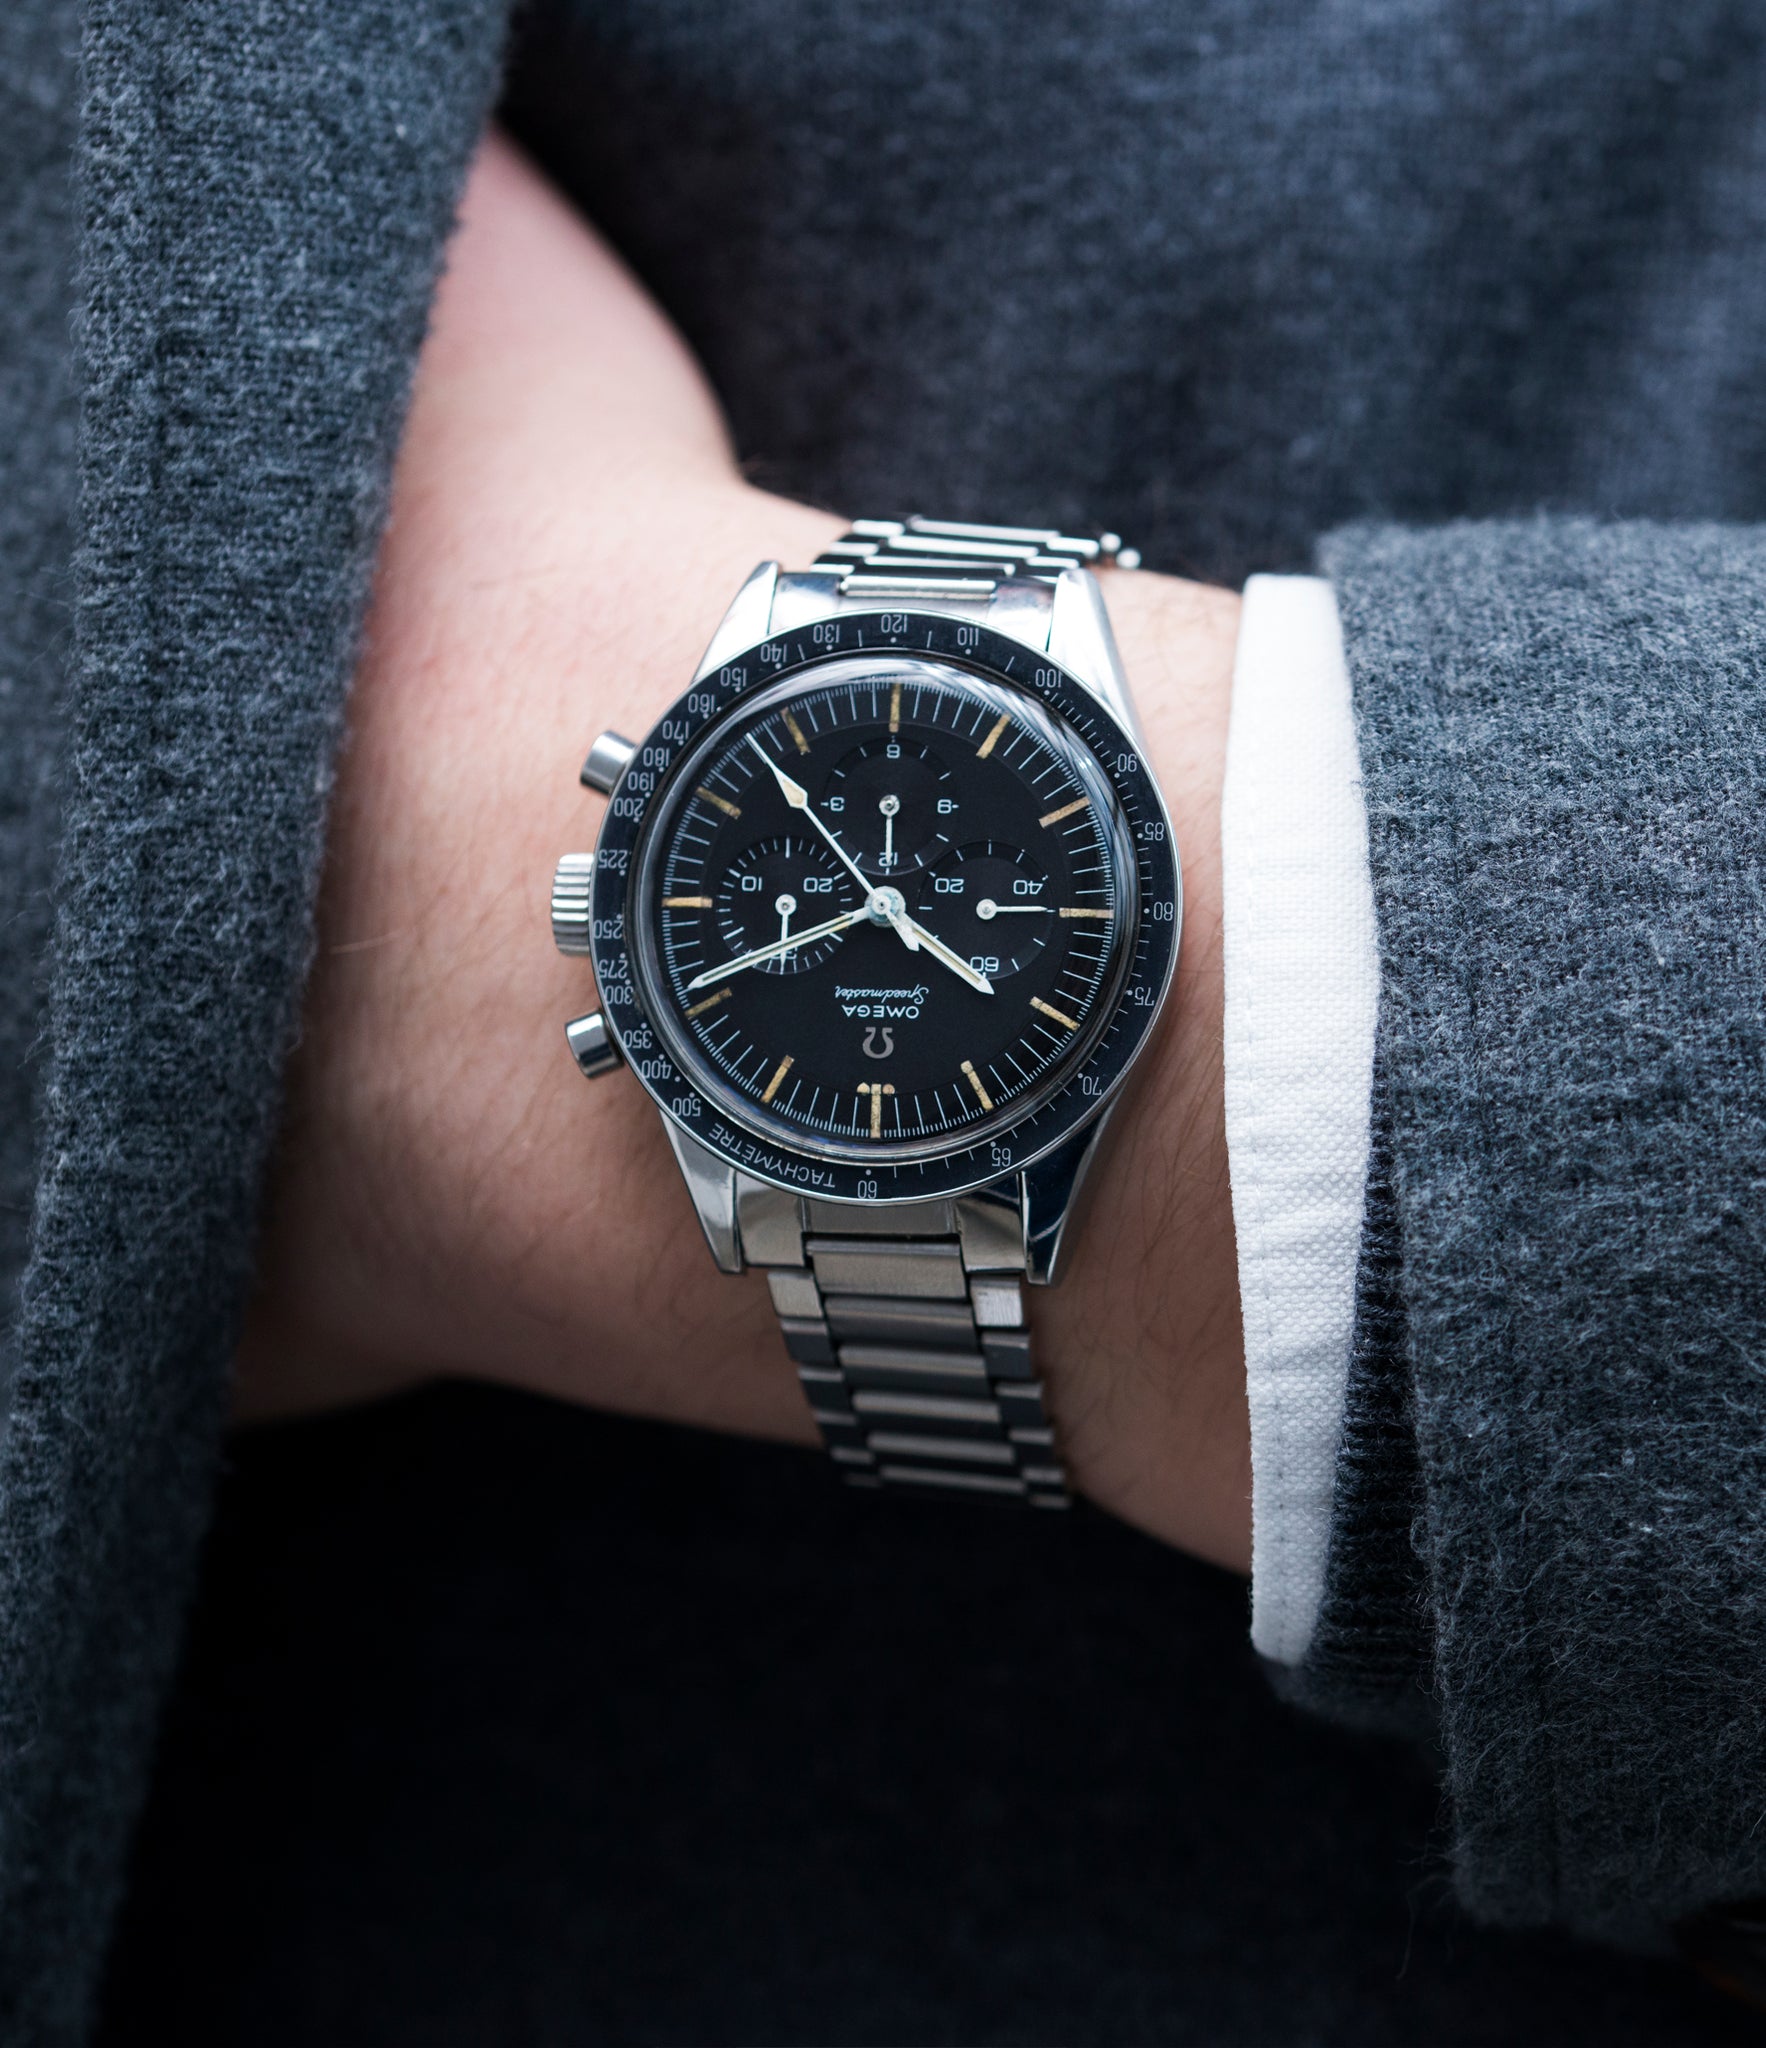 men's cool vintage watch Omega chronograph Speedmaster Pre-Professional Ed White 105.003 steel vintage chronograph 7912 flat-link bracelet for sale online at A Collected Man UK specialist of rare vintage watches